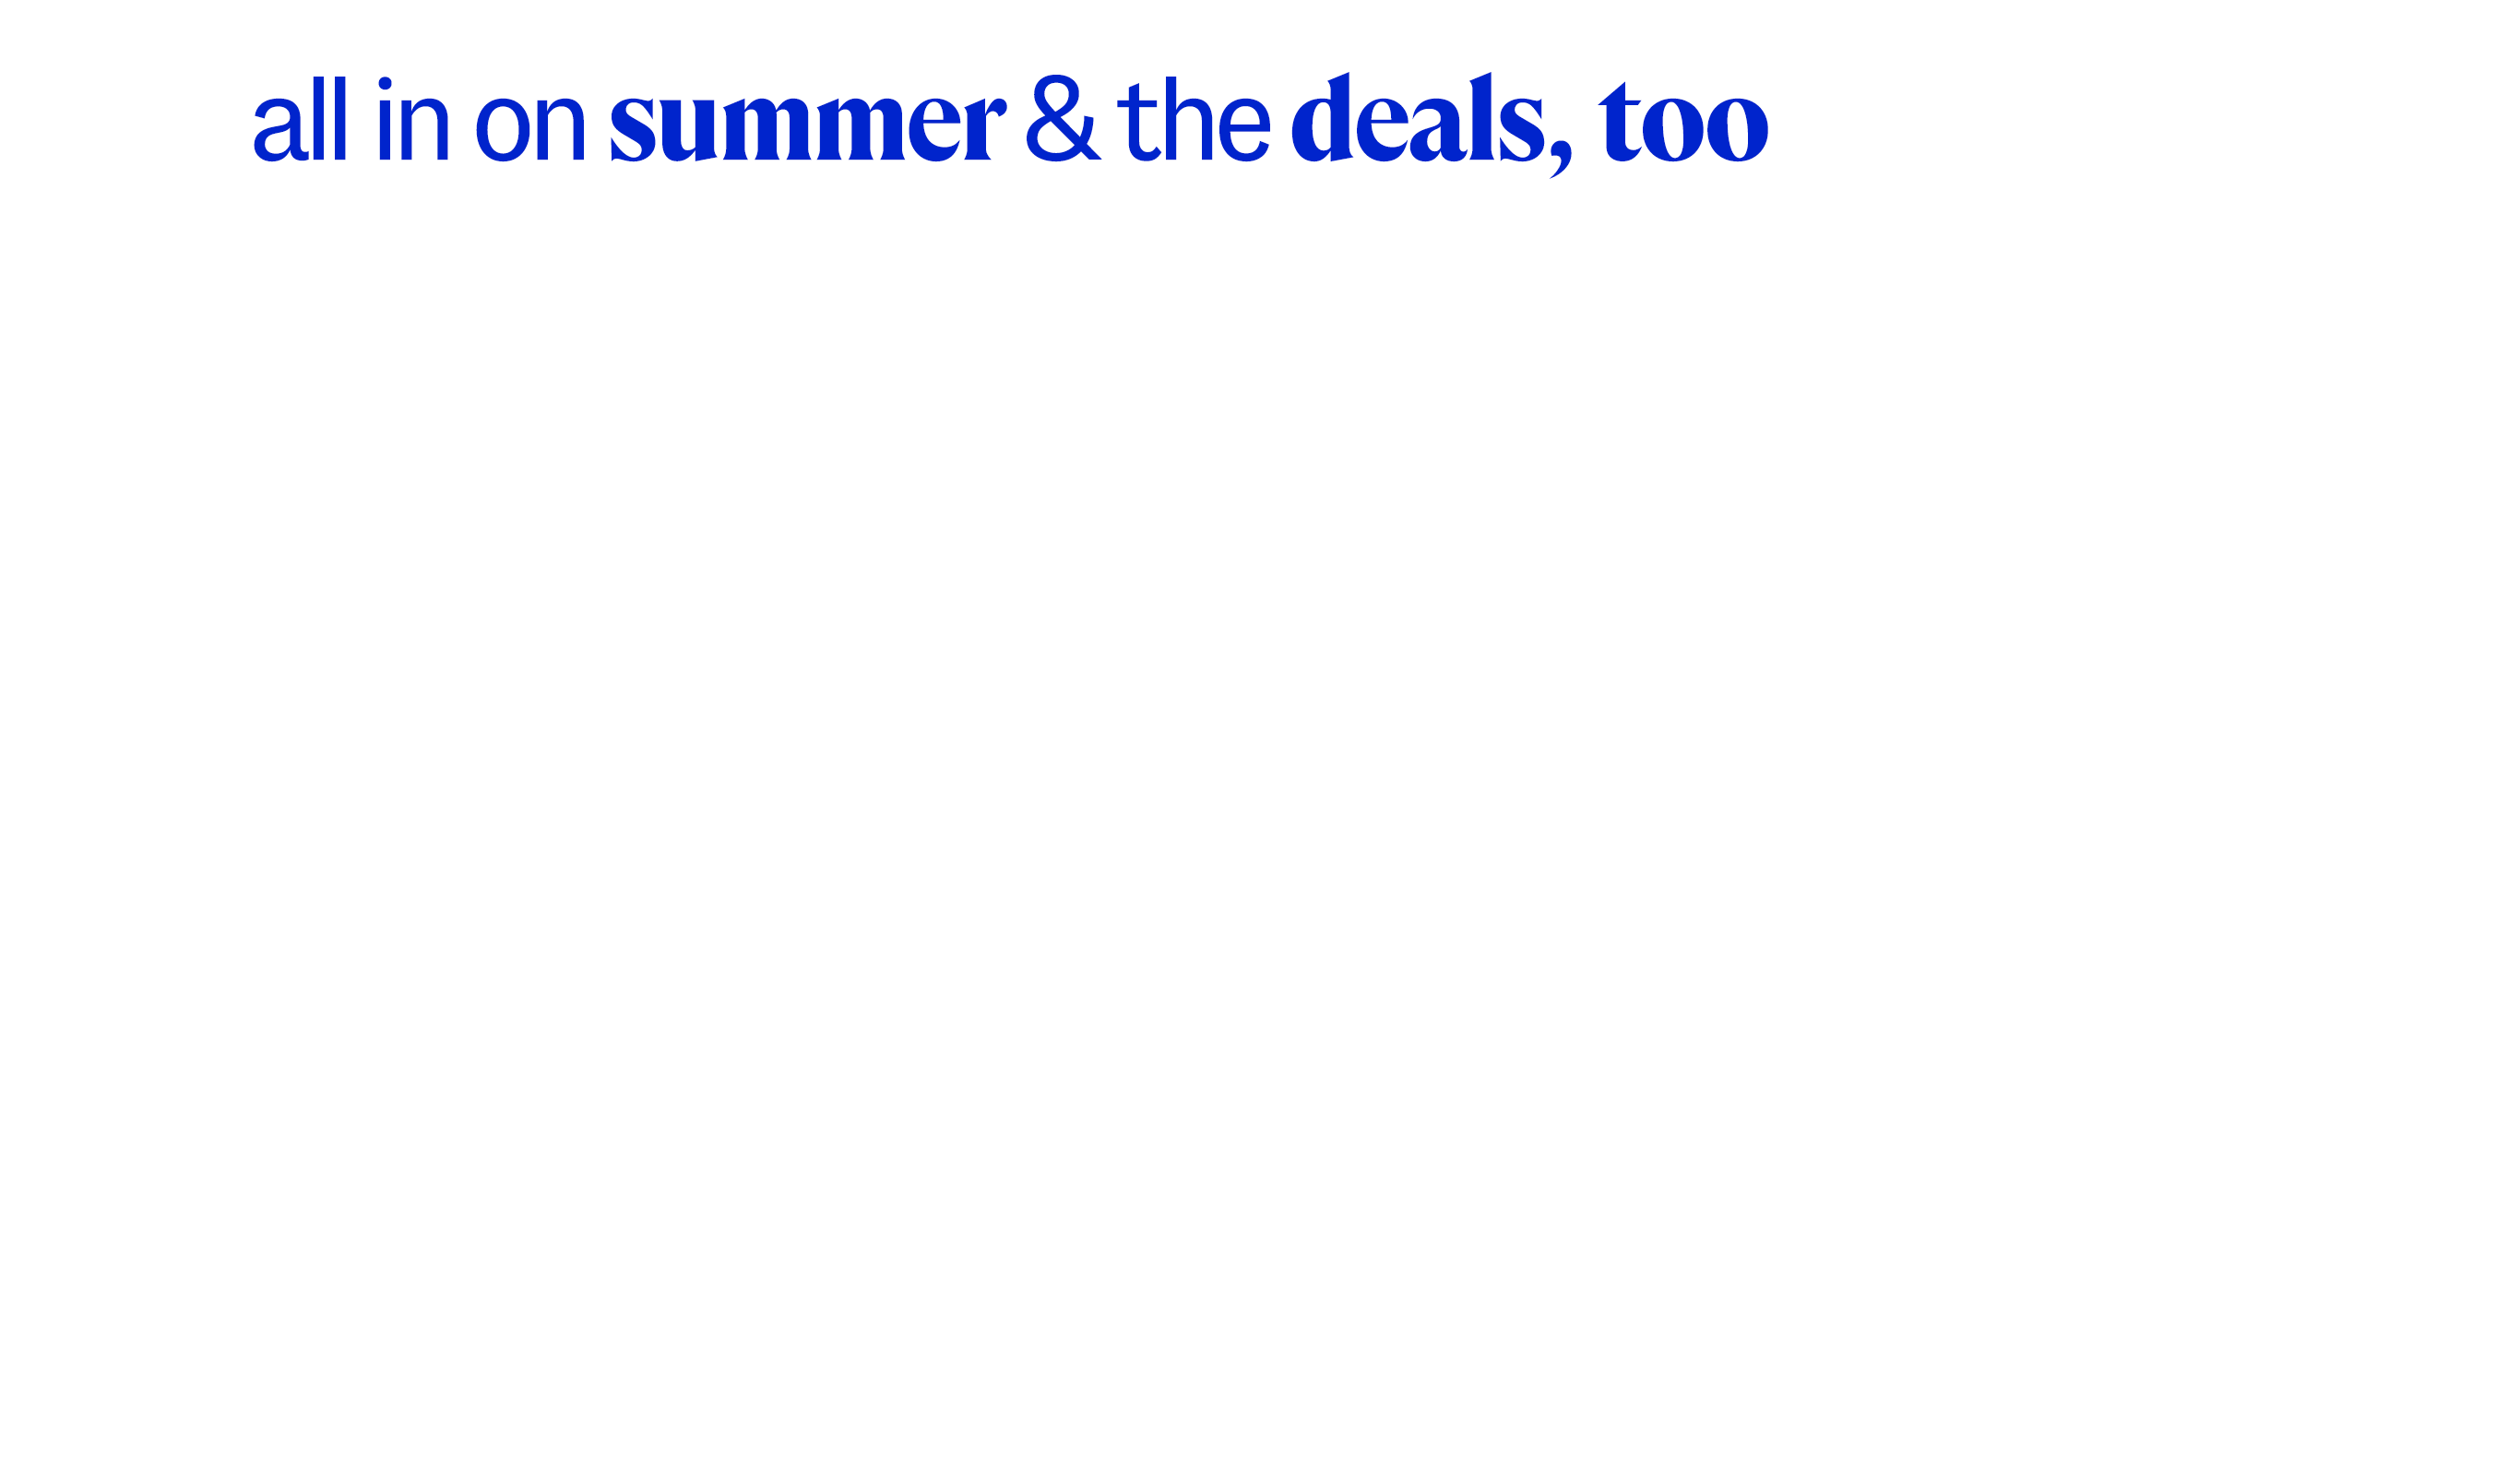 all in on summer & the deals, too